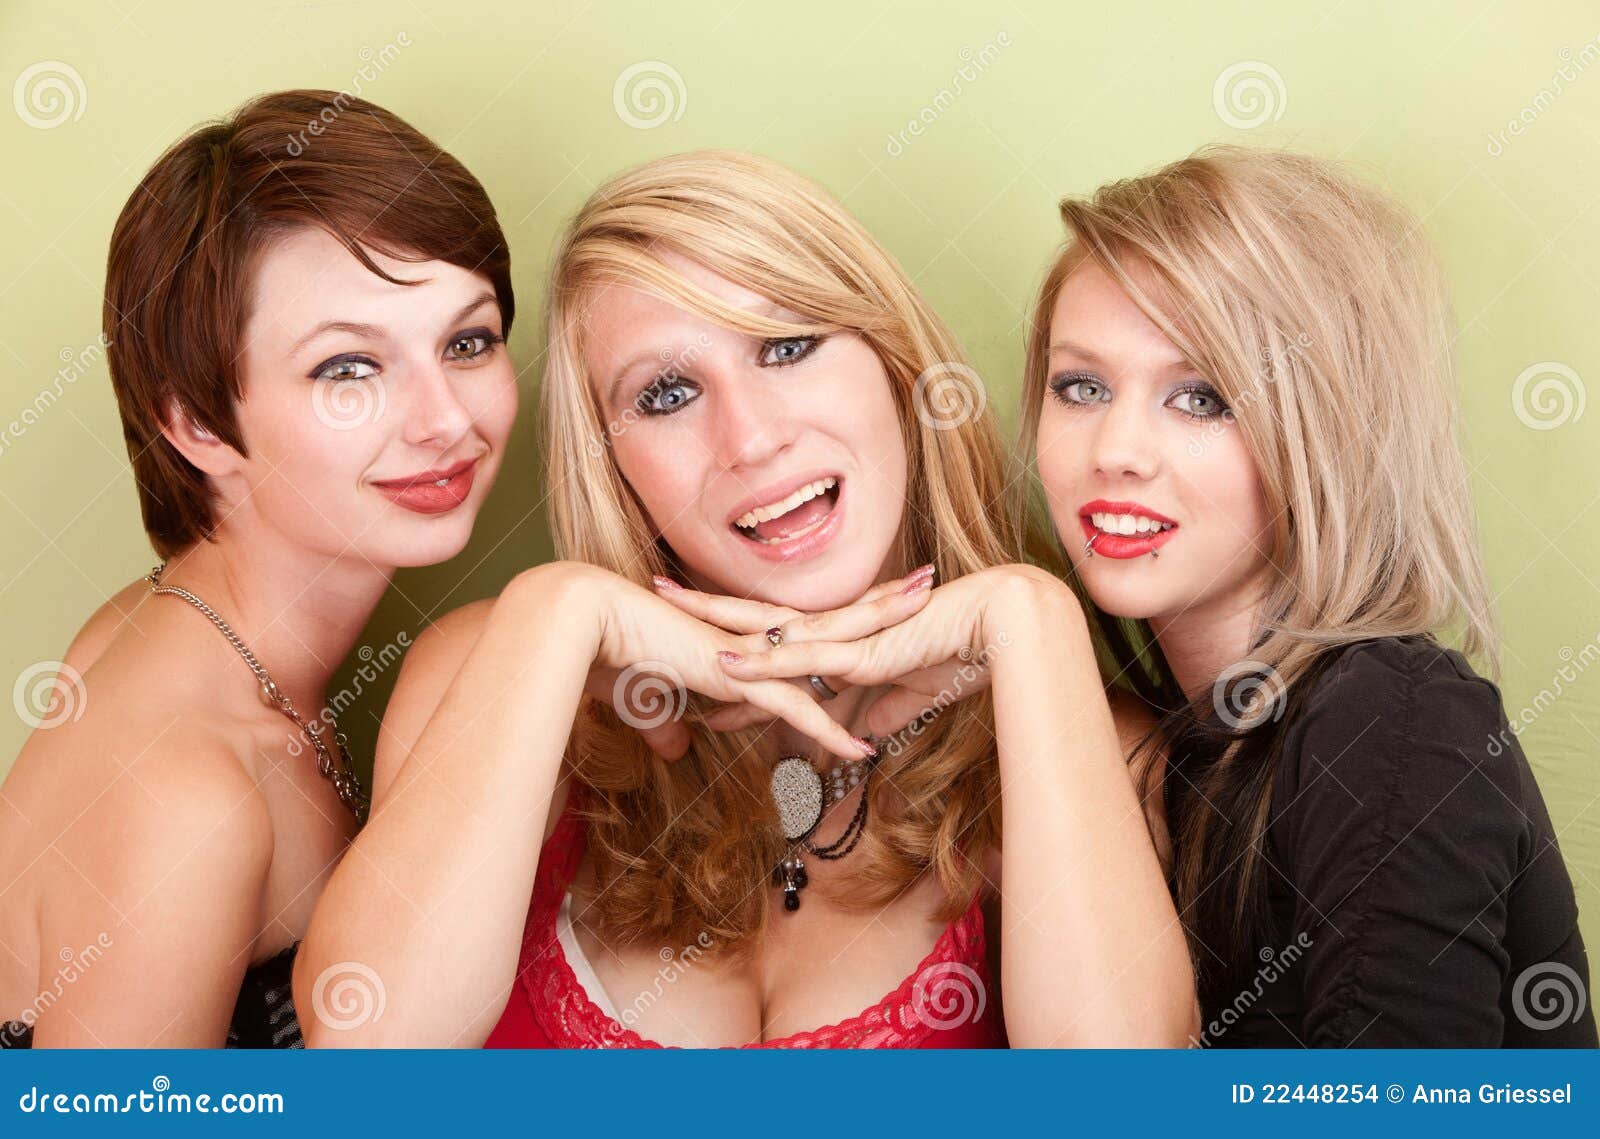 Three Attractive Teen Girls Smile For A Portrait Stock